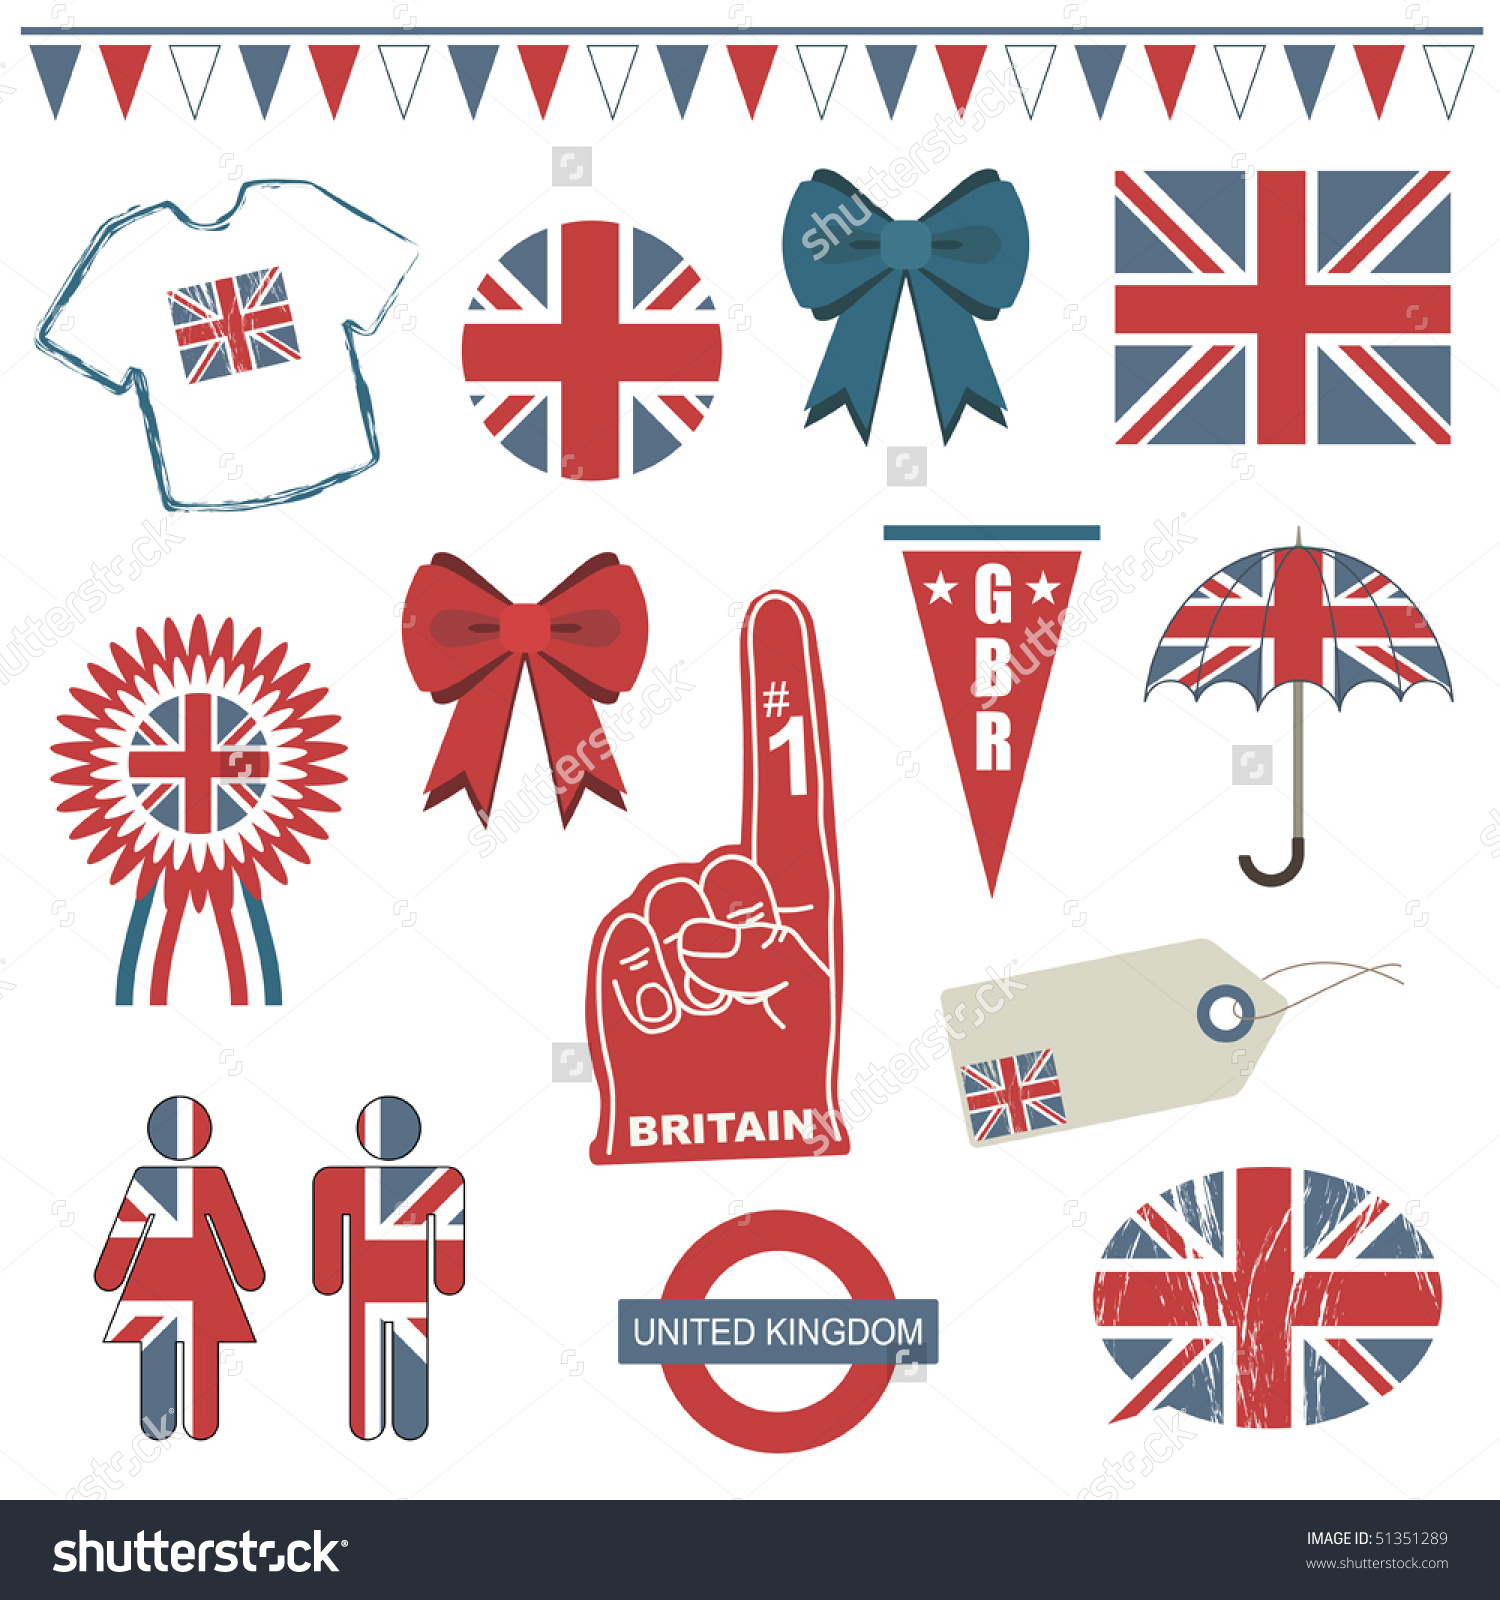 british clipart collection - photo #9